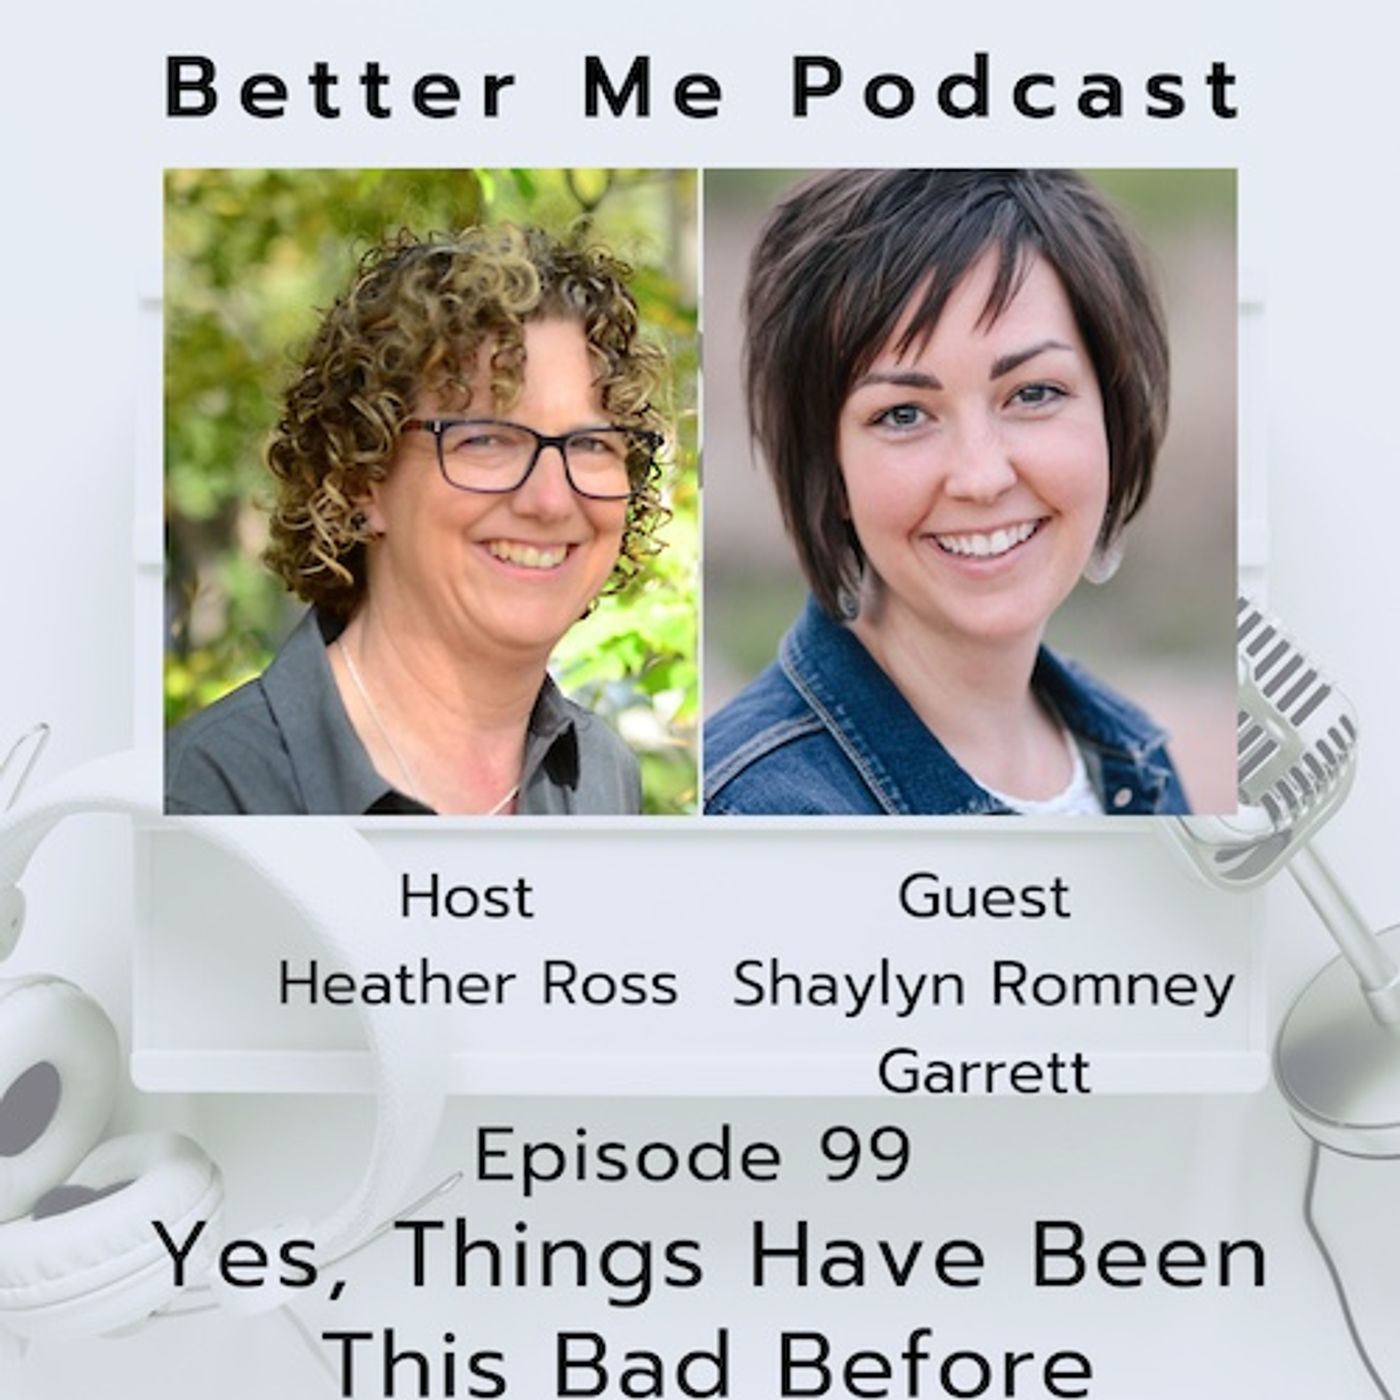 EP 99 Yes, Things Have Been This Bad Before (with guest Shaylyn Romney Garrett)